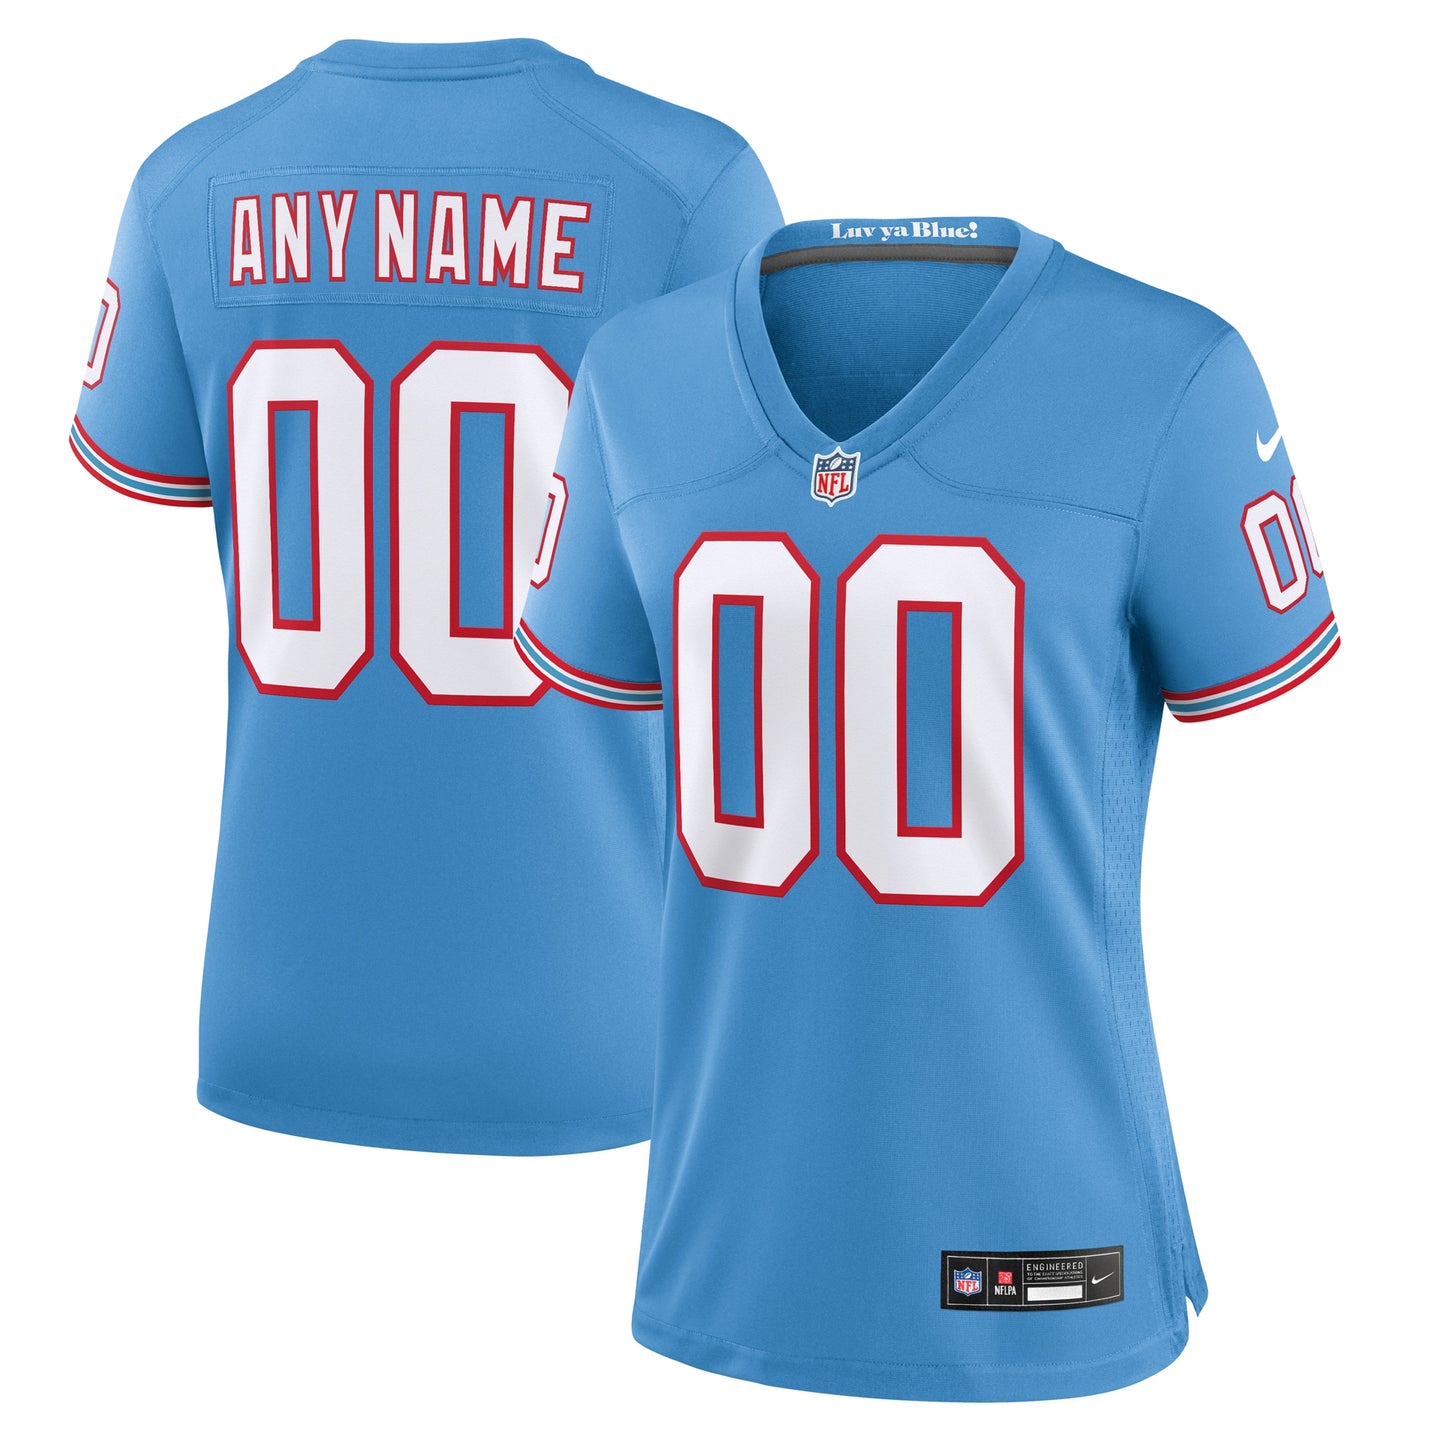 Tennessee Titans Nike Women's Oilers Throwback Custom Game Jersey - Light Blue